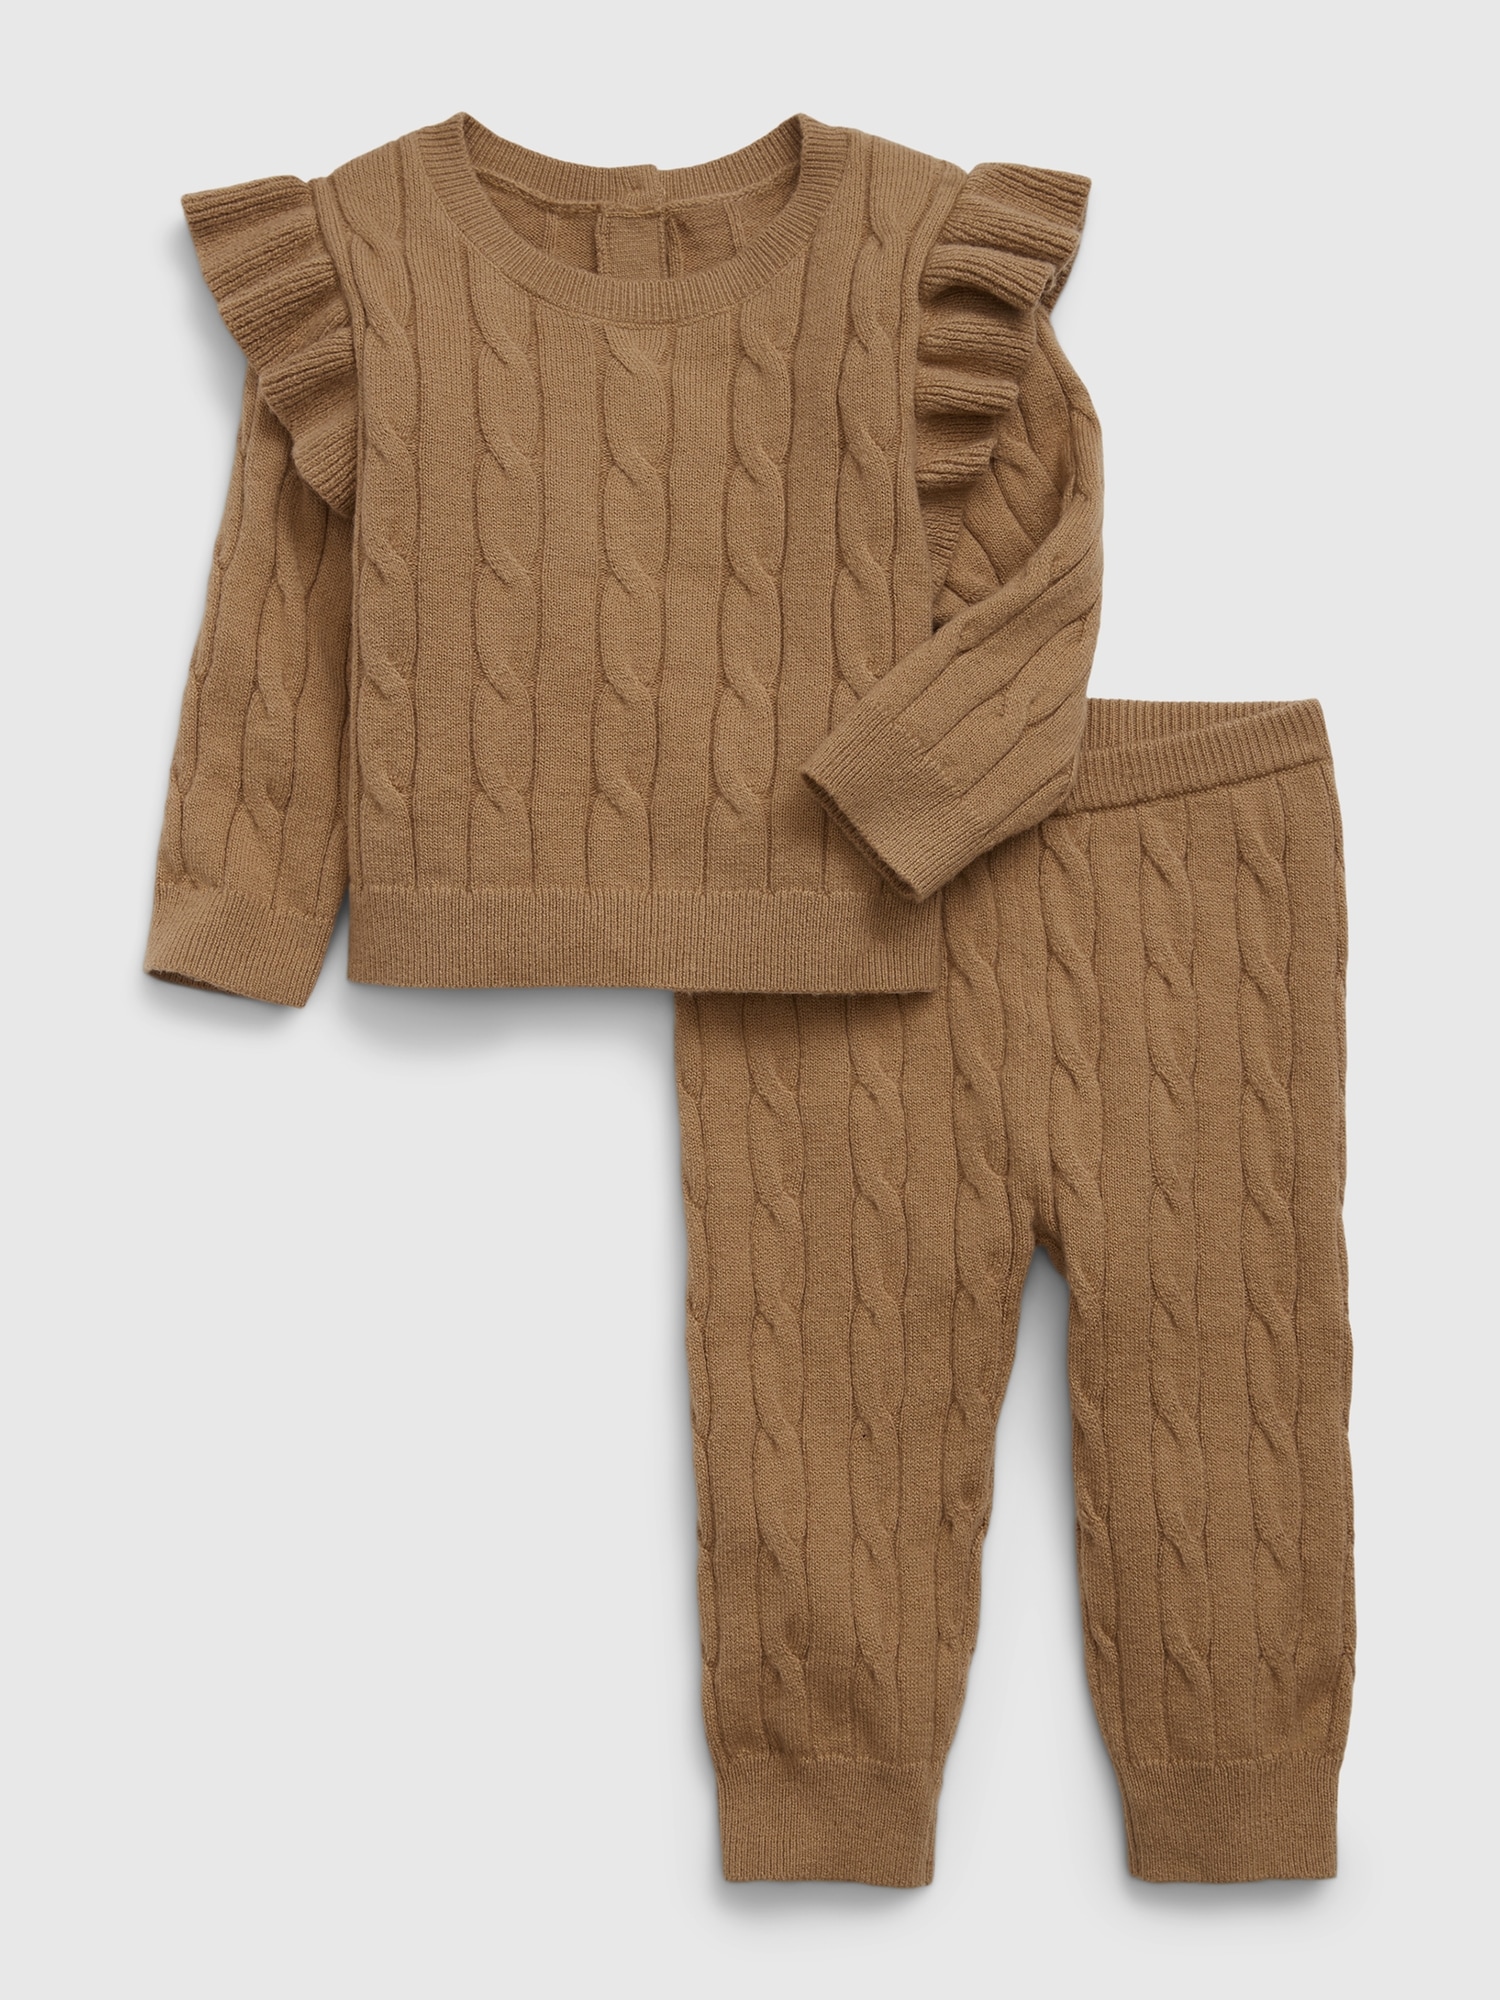 Baby CashSoft Cable-Knit Sweater Outfit Set